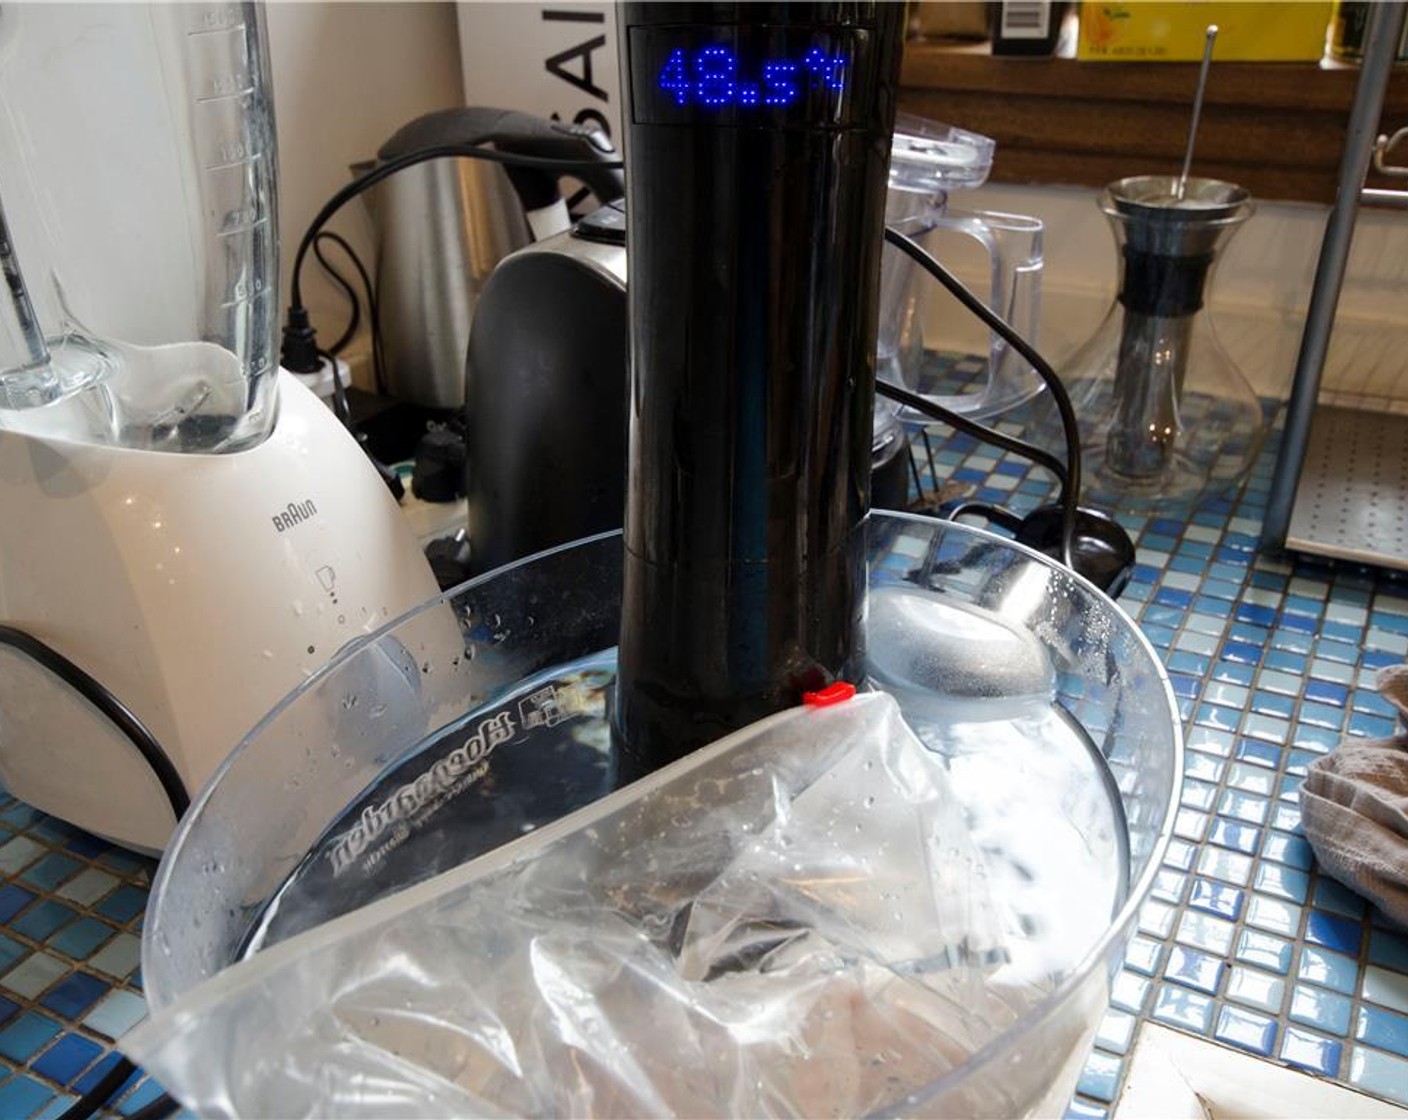 step 8 Preheat sous-vide water bath to 140 degrees F (60 degrees C). Add turkey, and cook for 4 to 5 hours. Remove and run under cool running water, or transfer to an ice bath to chill for five minutes.